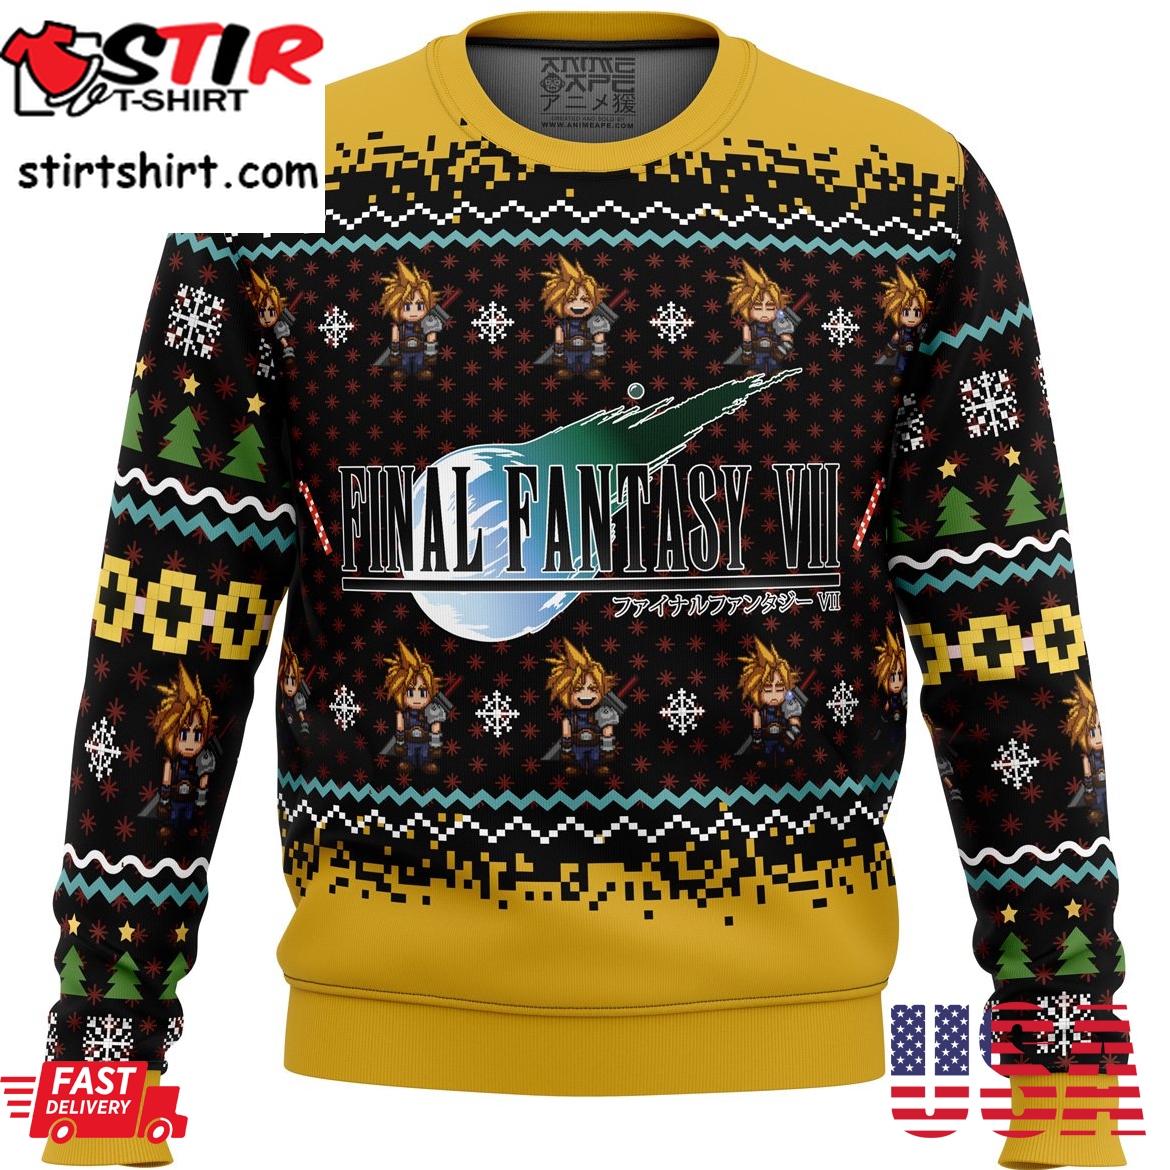 Final Fantasy Vii Ugly Christmas Sweater